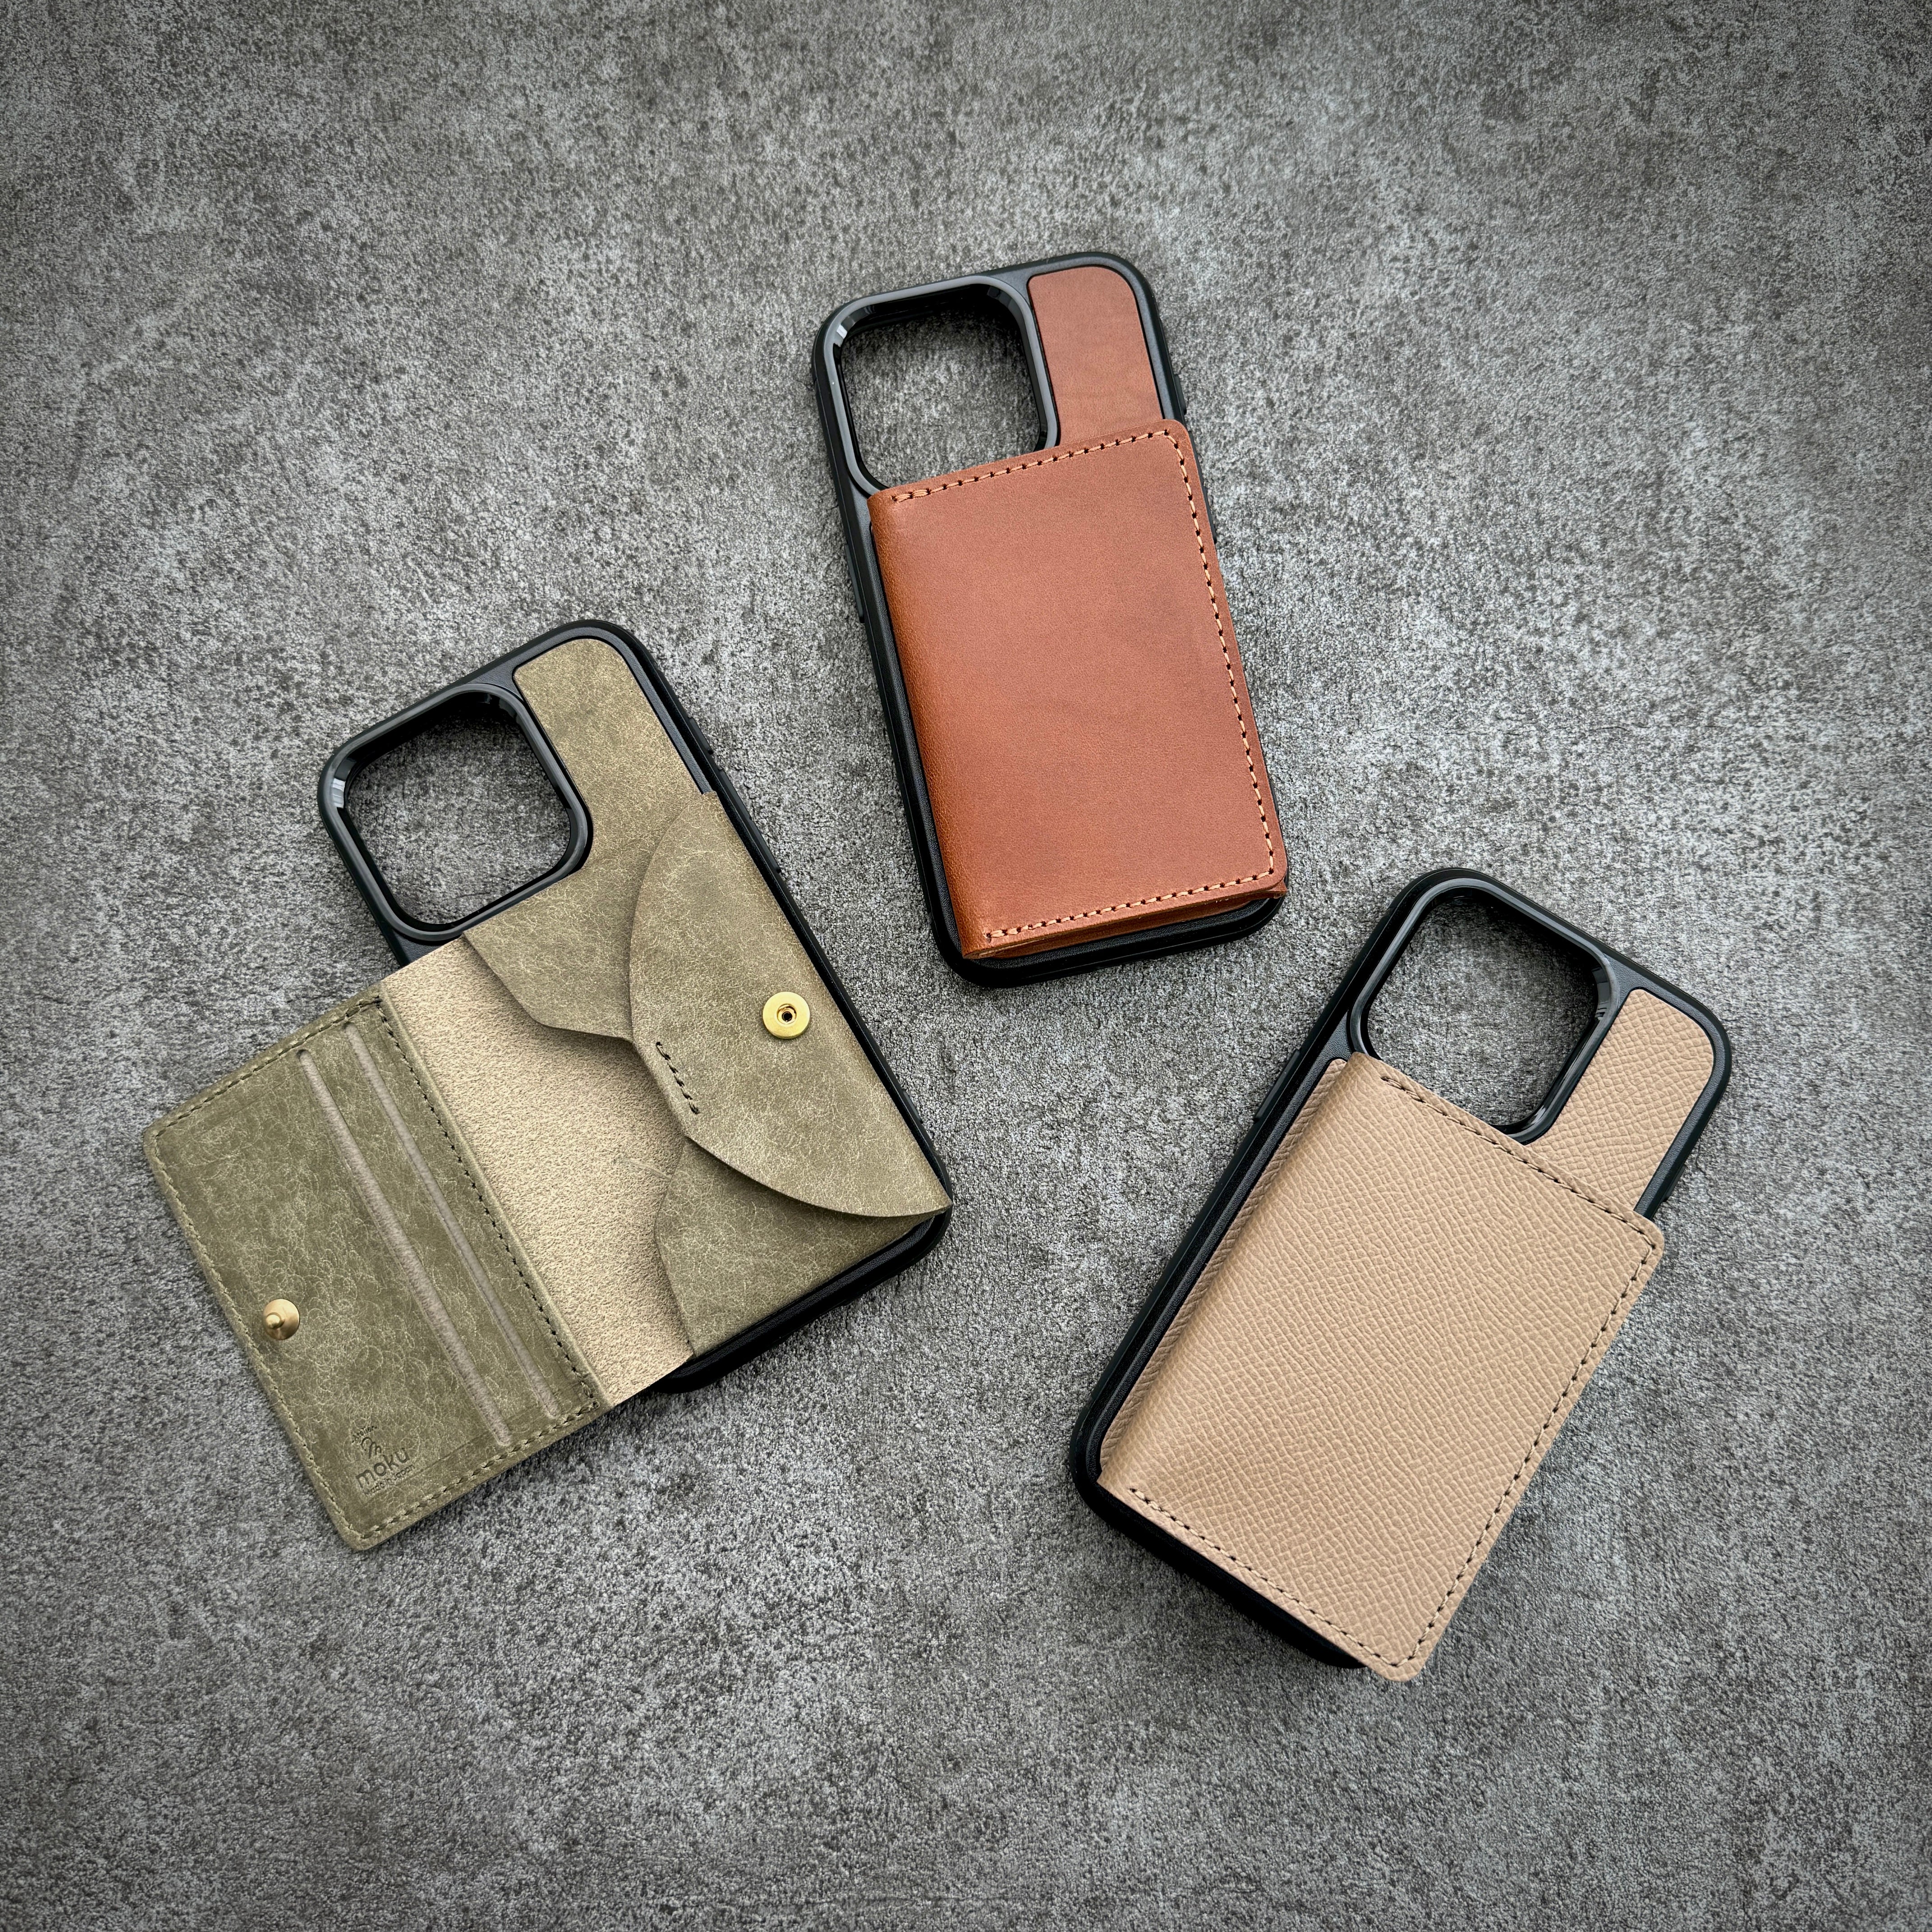 Motto Noblessa iPhone case and wallet